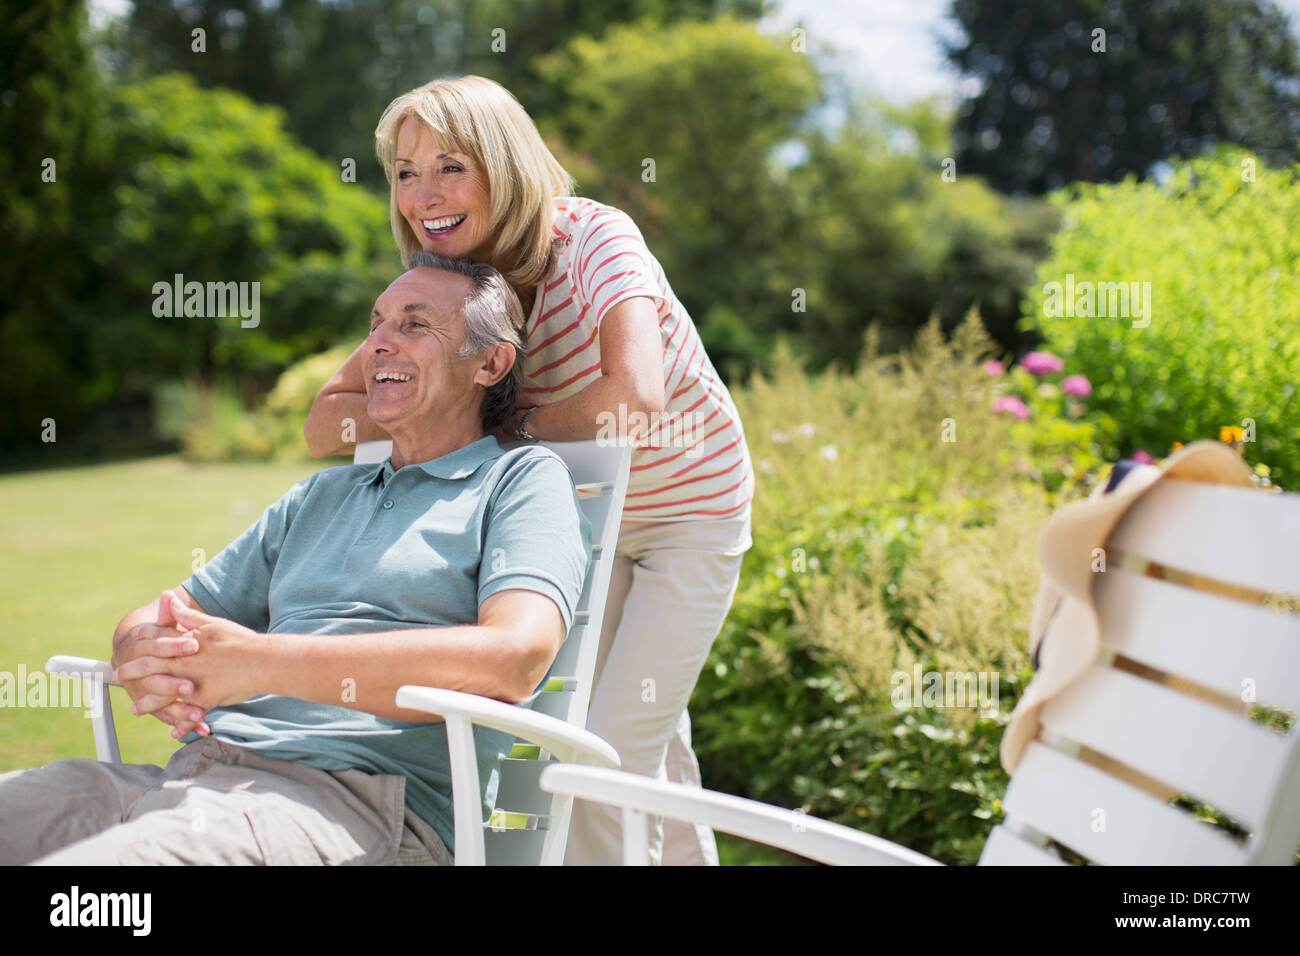 Senior couple relaxing in backyard Banque D'Images